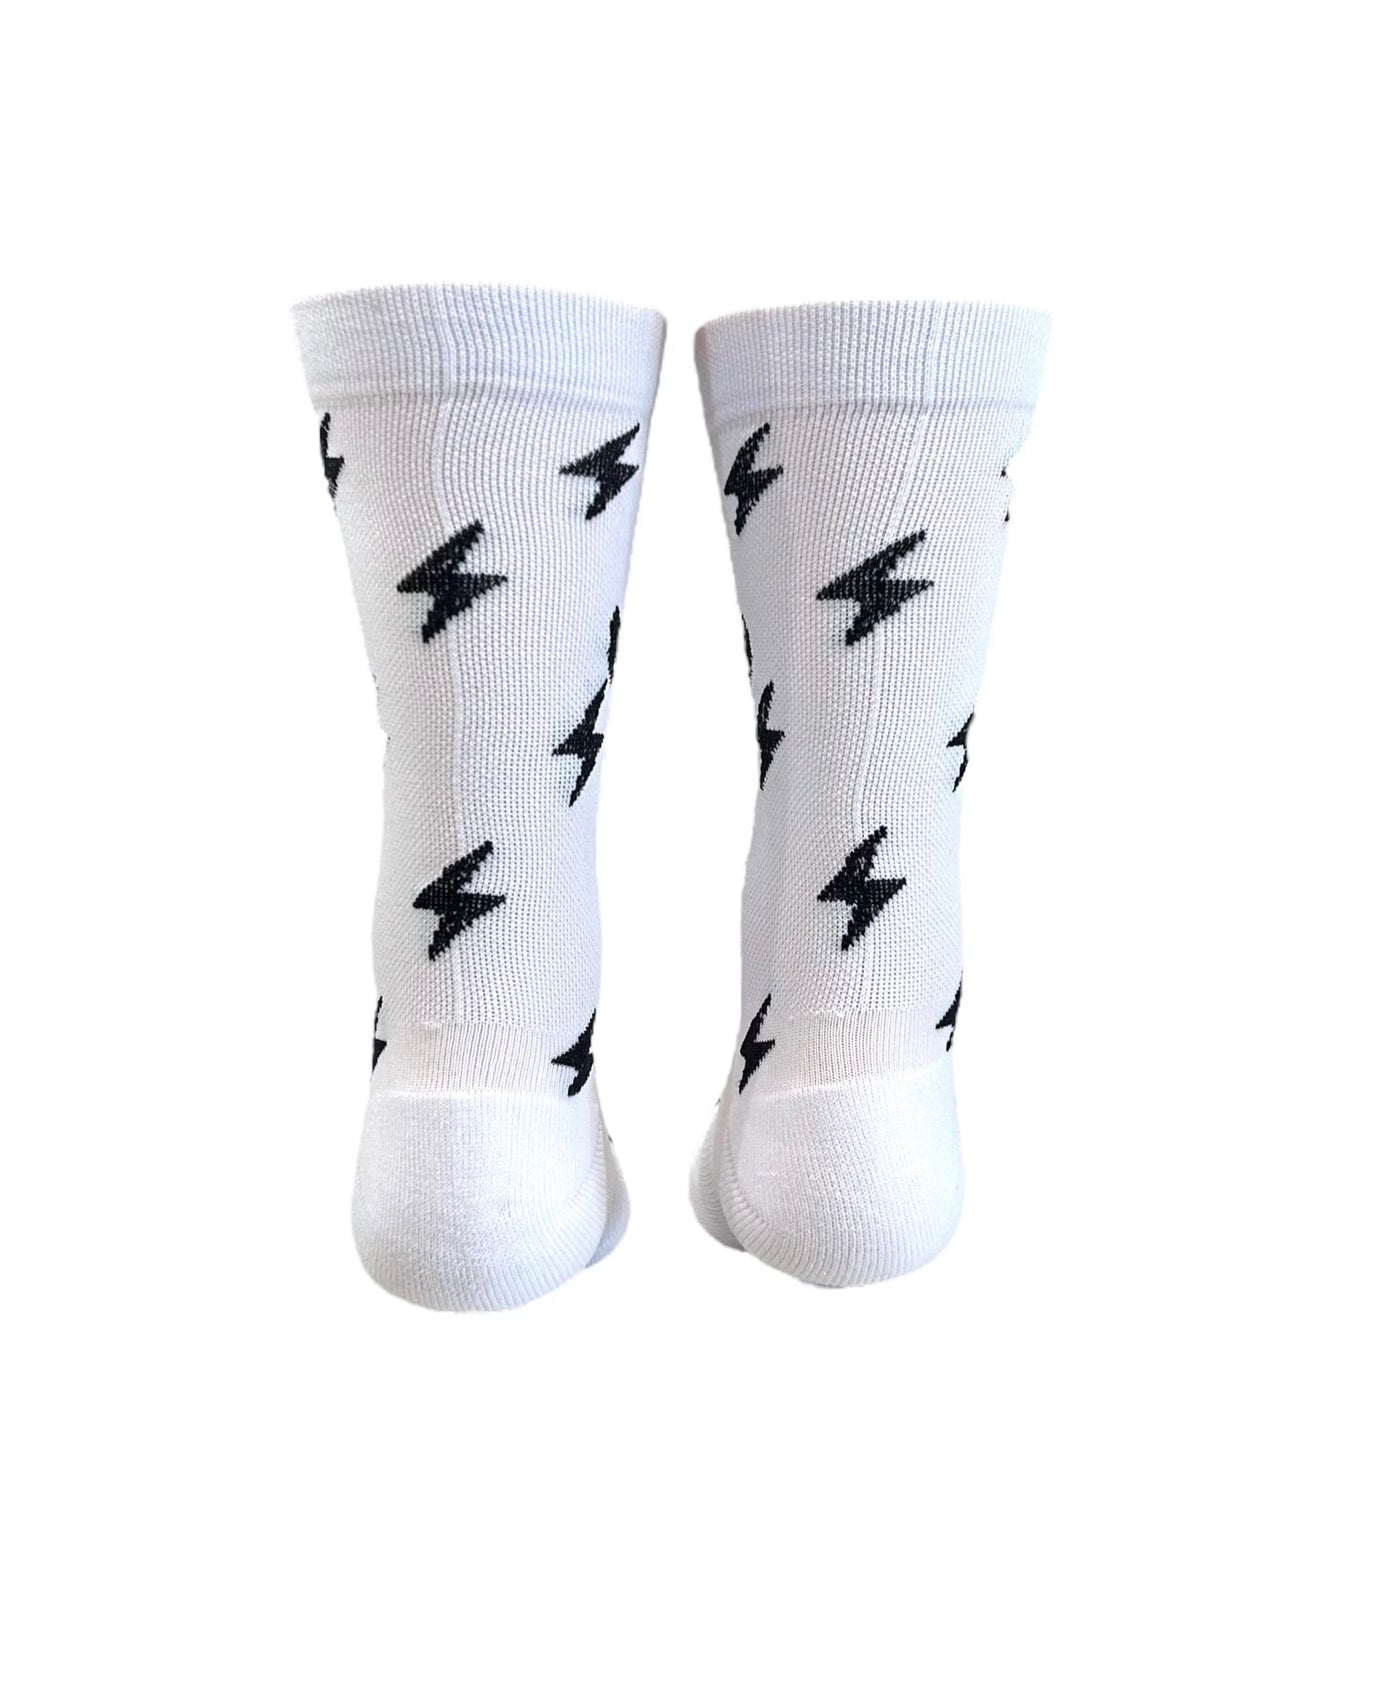 The Most “Electrifying White and Black” men’s and woman 6” compression cycling and running socks.